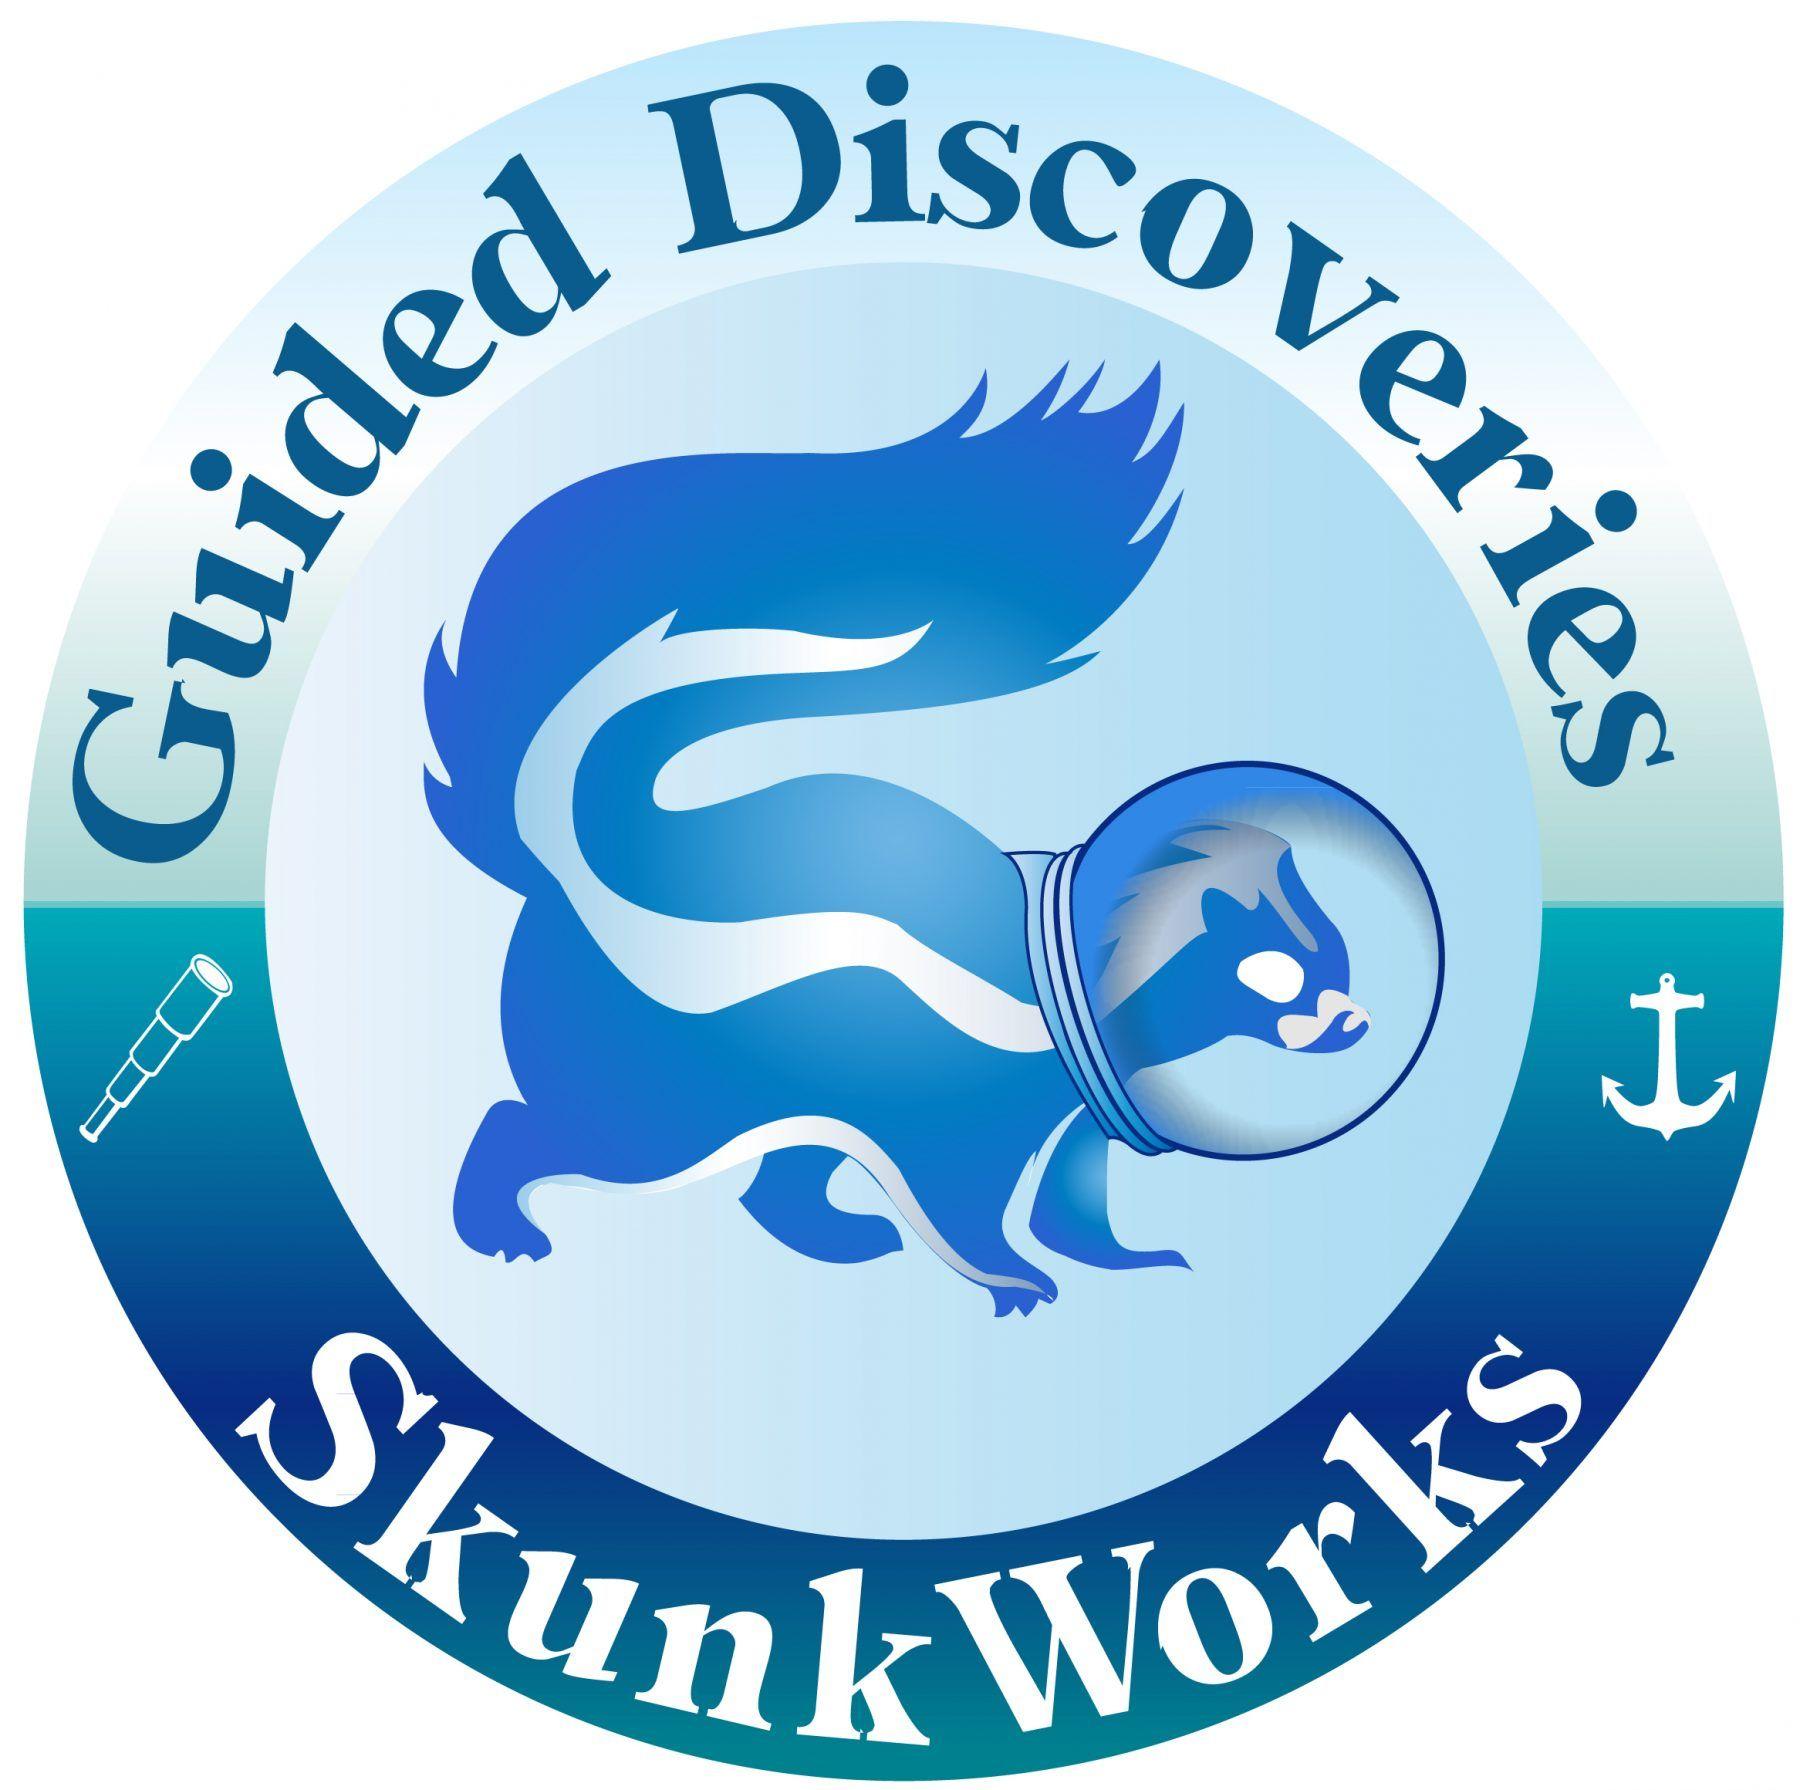 Skunkworks Logo - Research and Development DiscoveriesGuided Discoveries